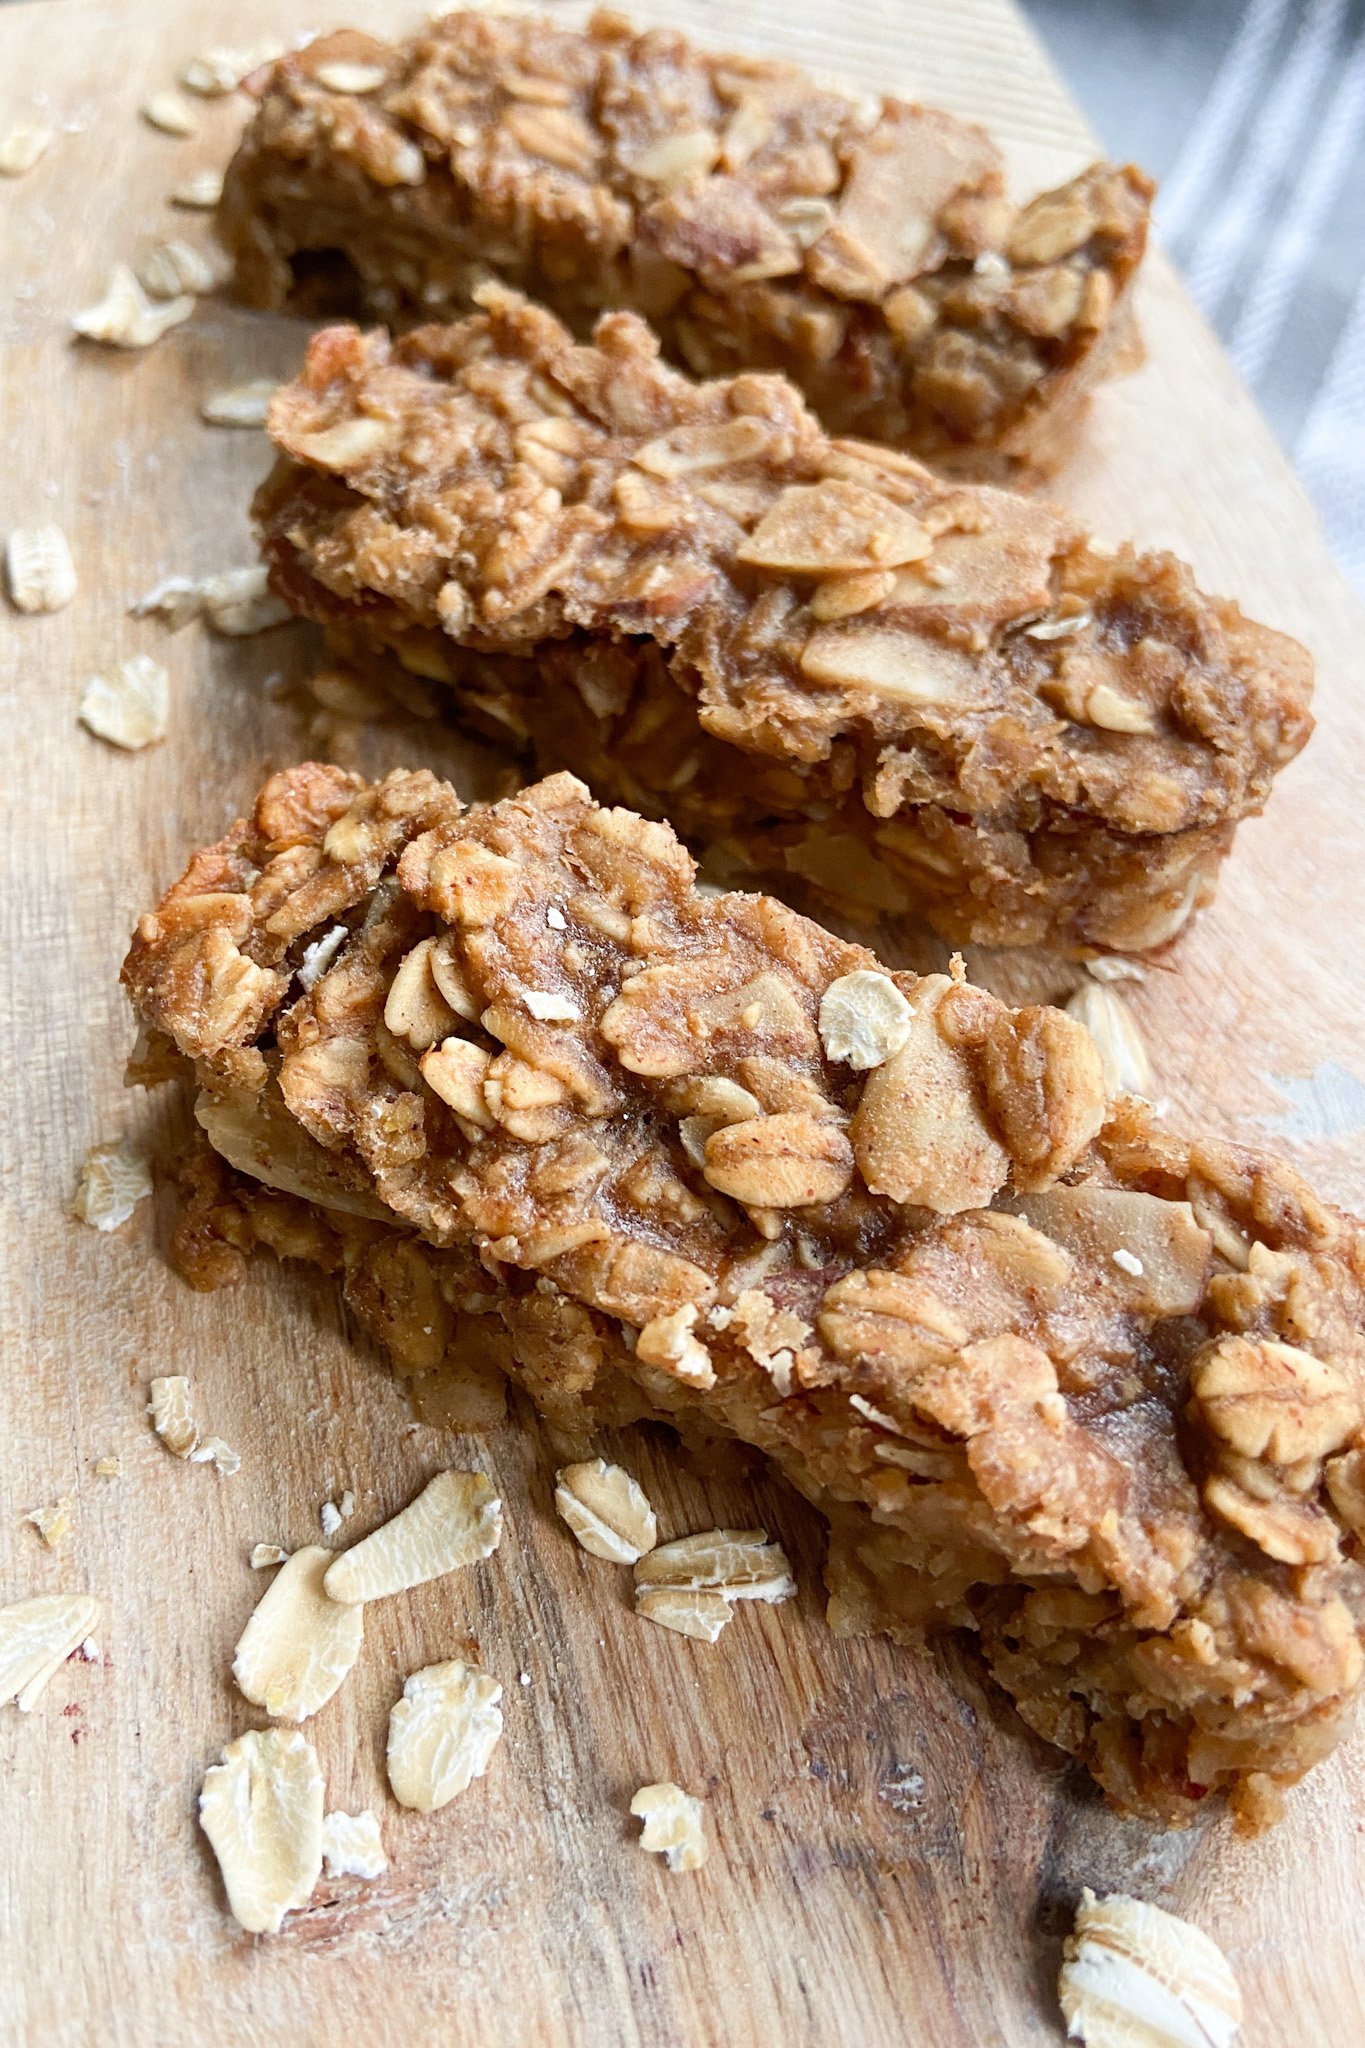 Peanut butter and banana granola bars served on a wooden cutting board